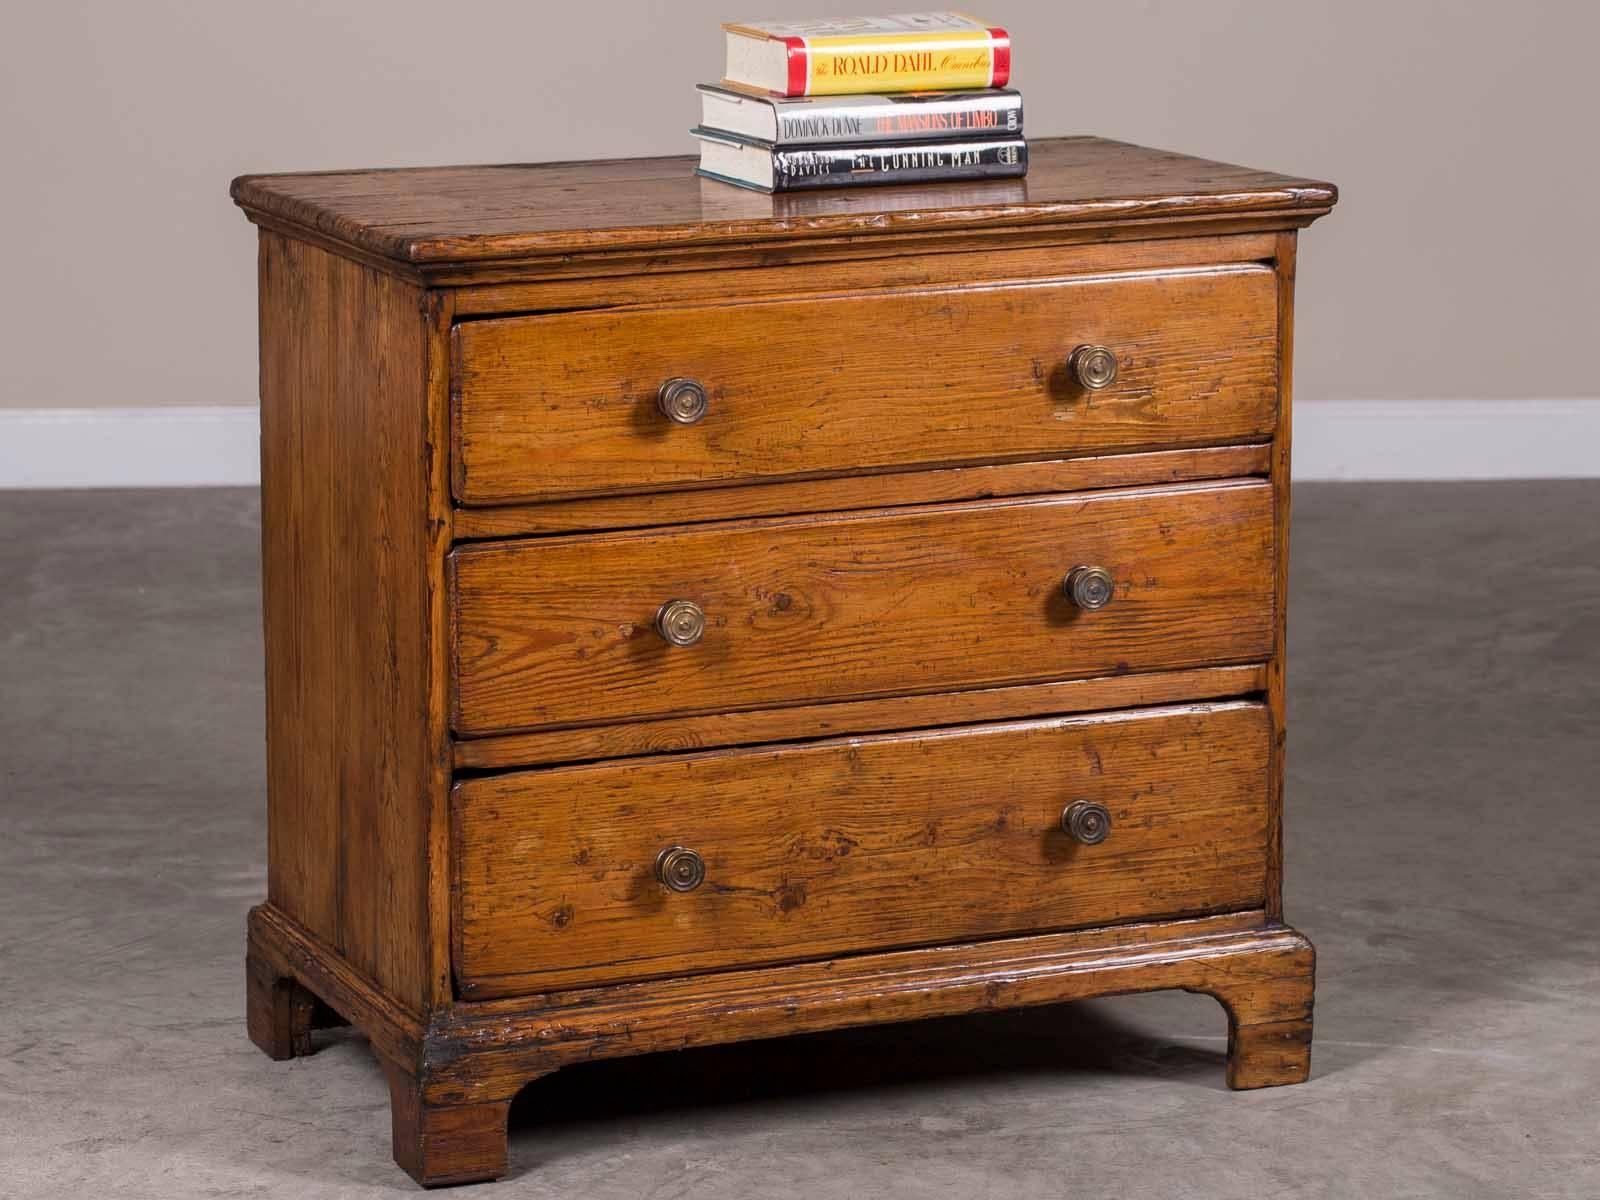 Be the first to see our new arrivals directly through 1stdibs! Please click follow dealer below. 

The warm color and patina of this antique English pine George III period chest of drawers from England circa 1770 make this an exceptional piece.